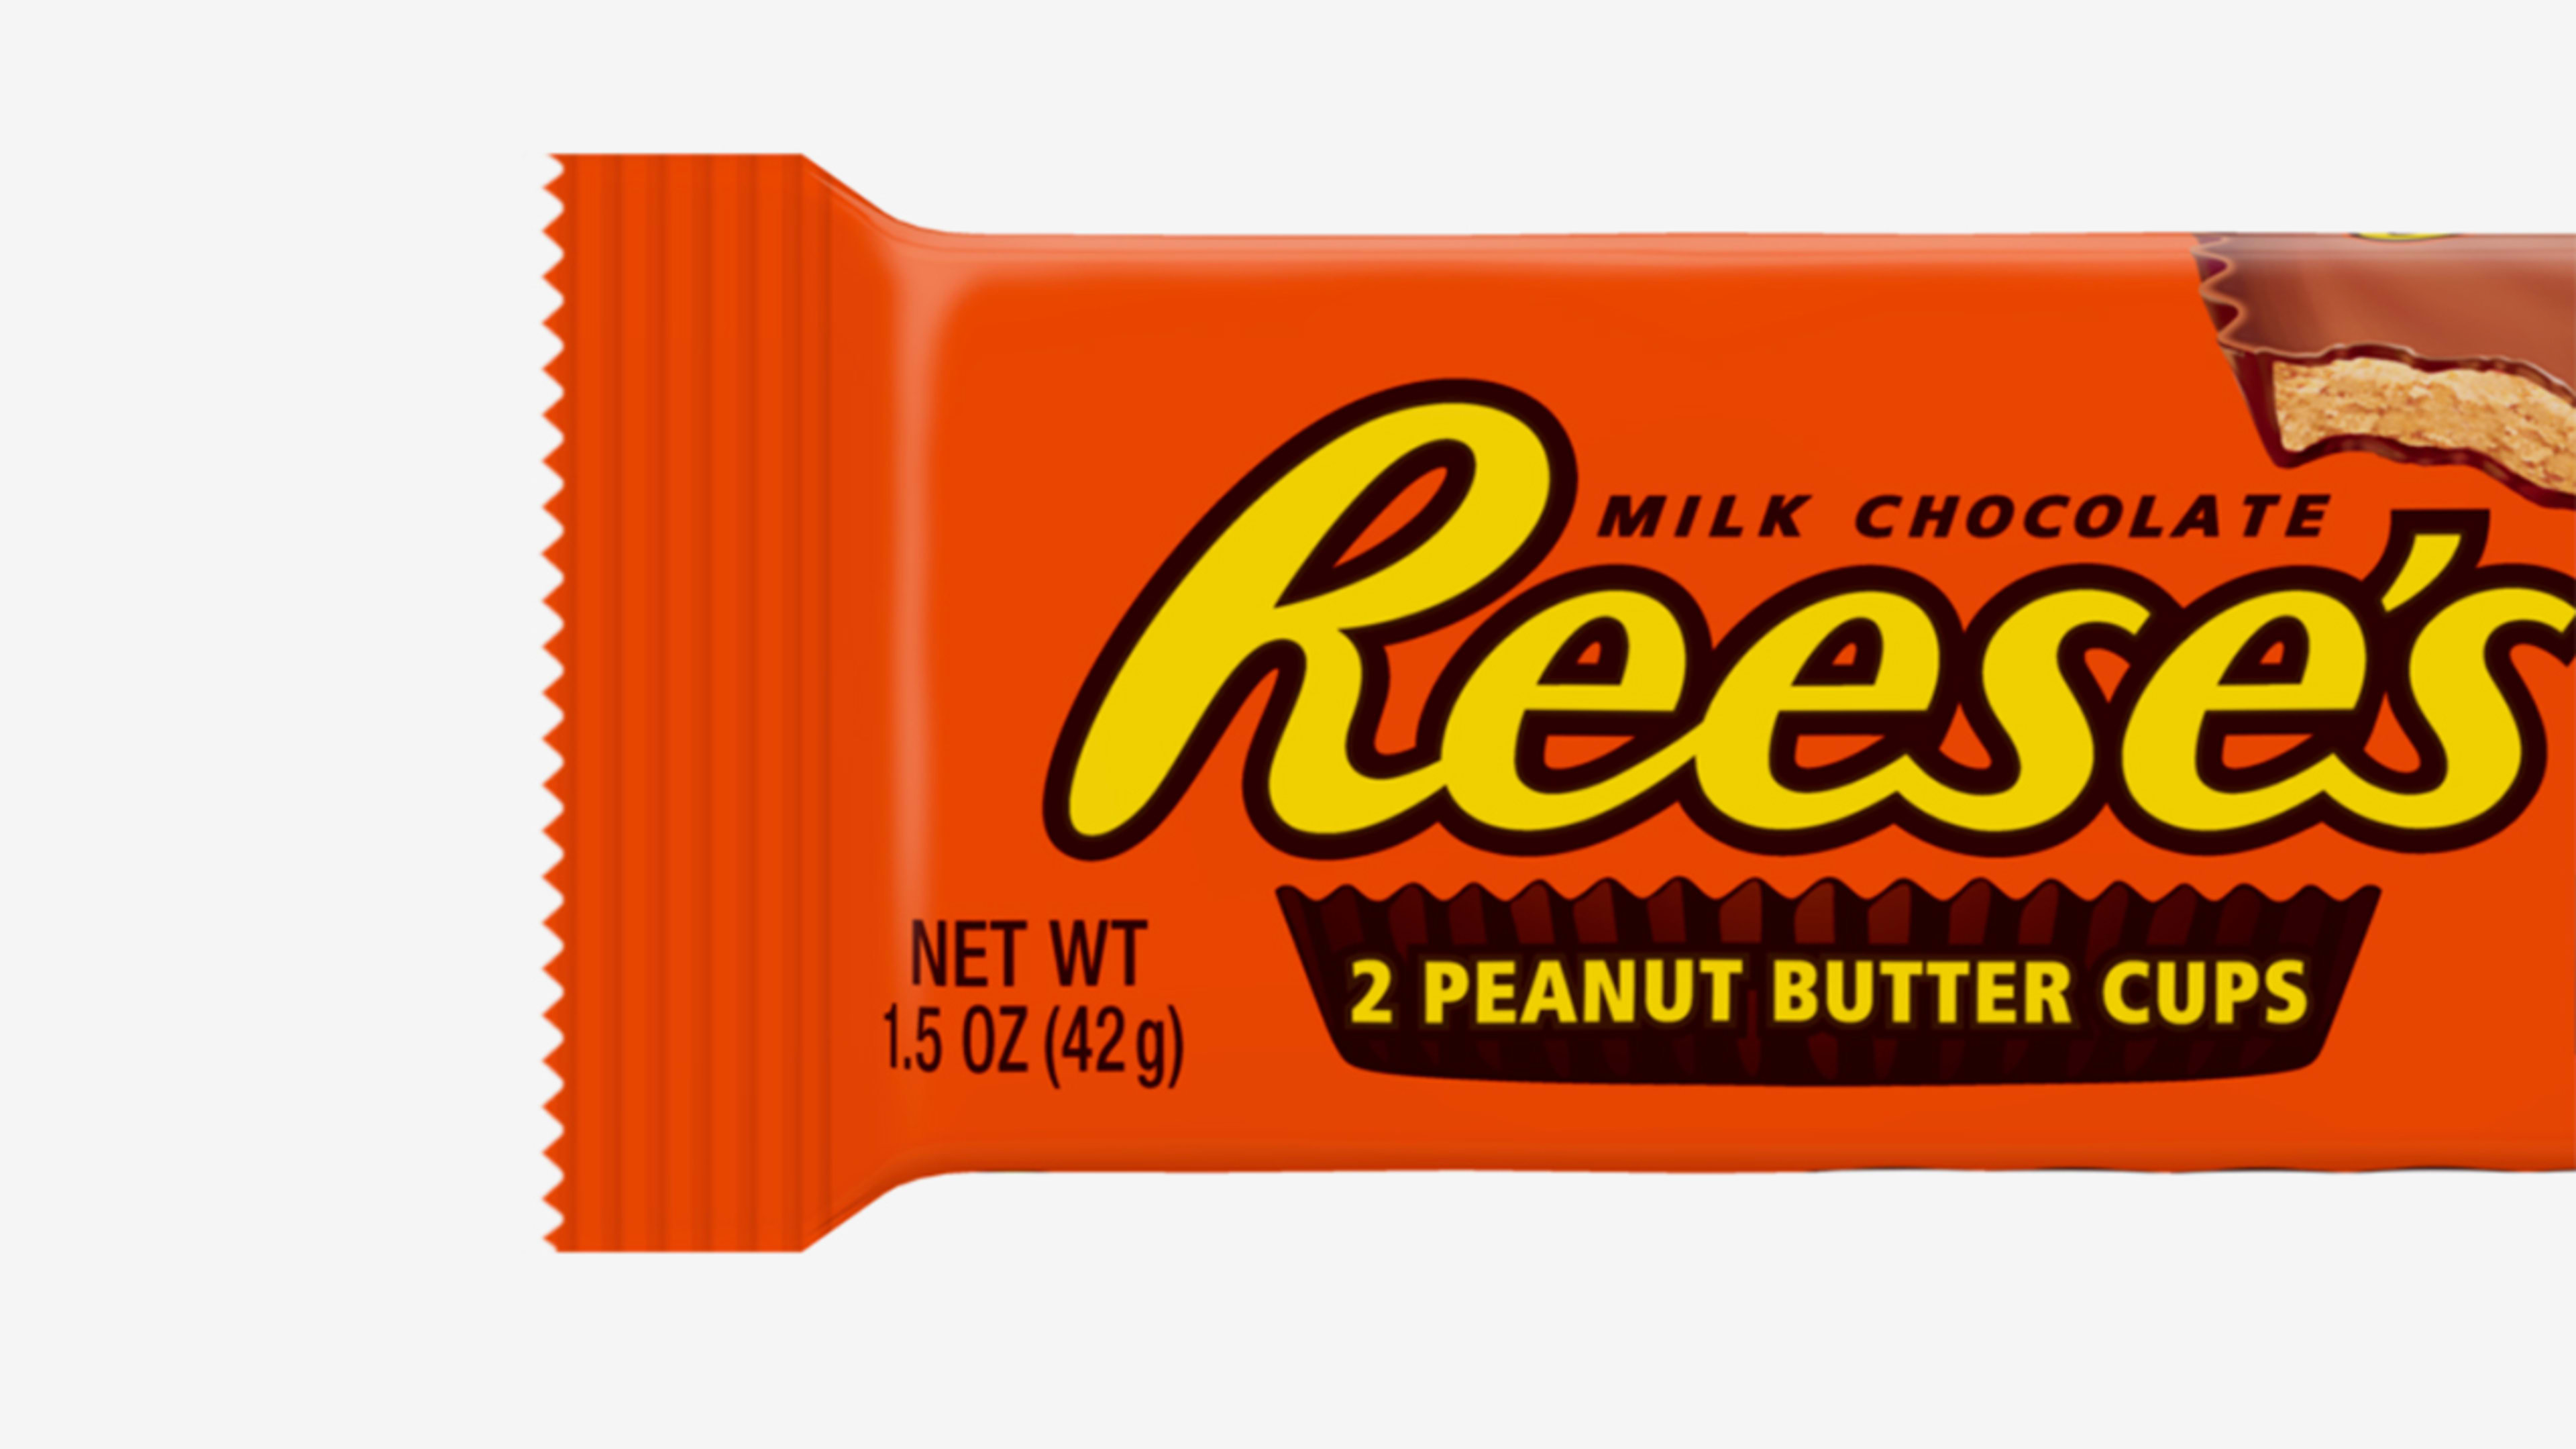 People are upset about new slimmer Reese’s Peanut Butter Cups